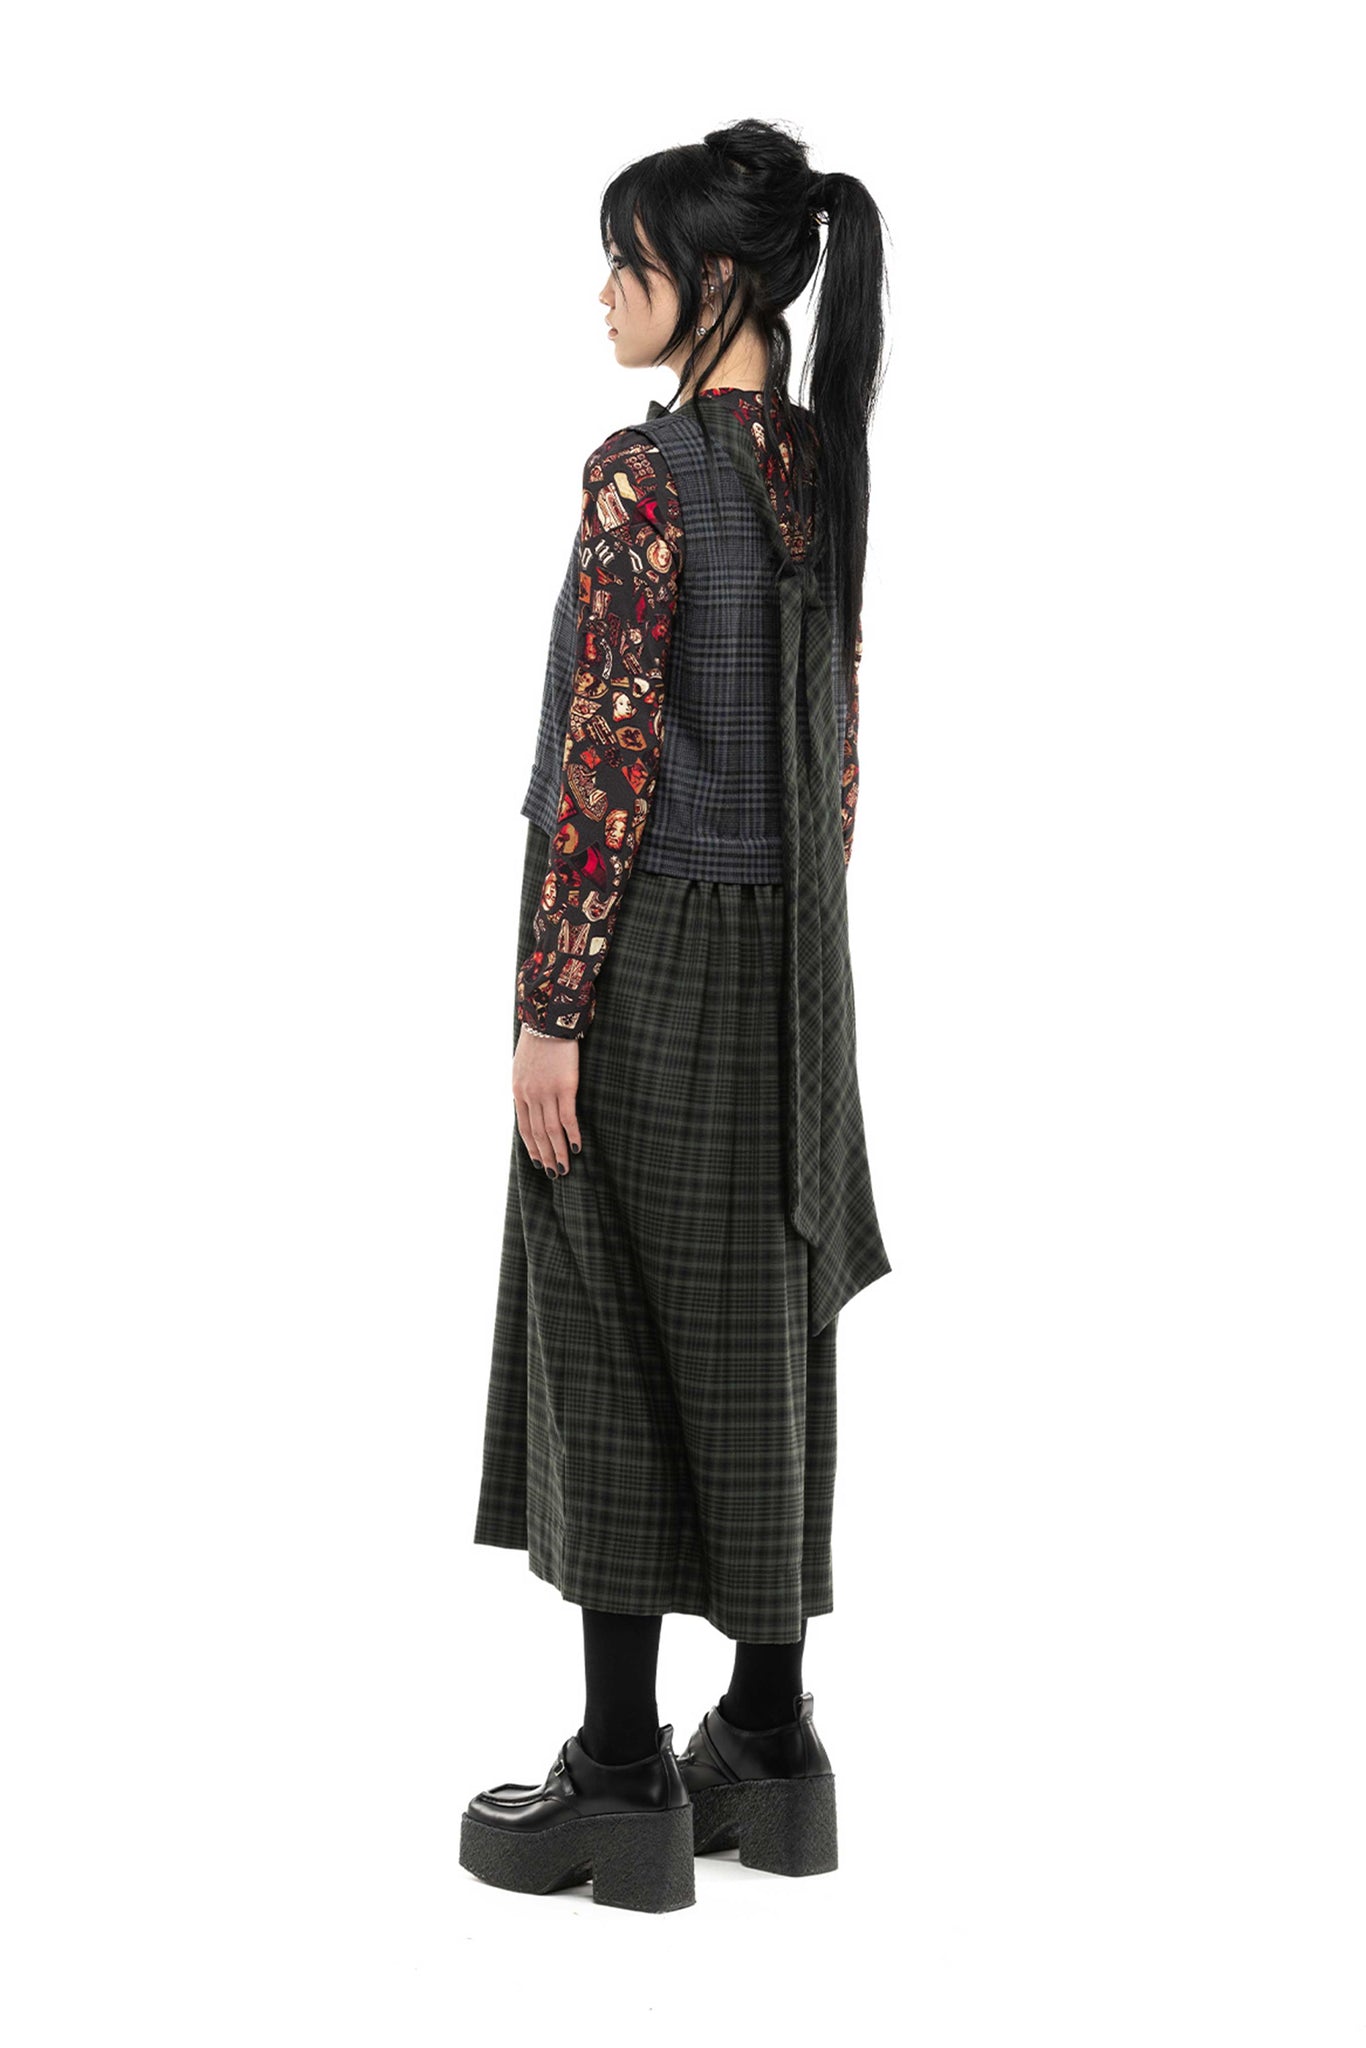 Double Vision Dress | Plaid Suiting | Mixed Plaid